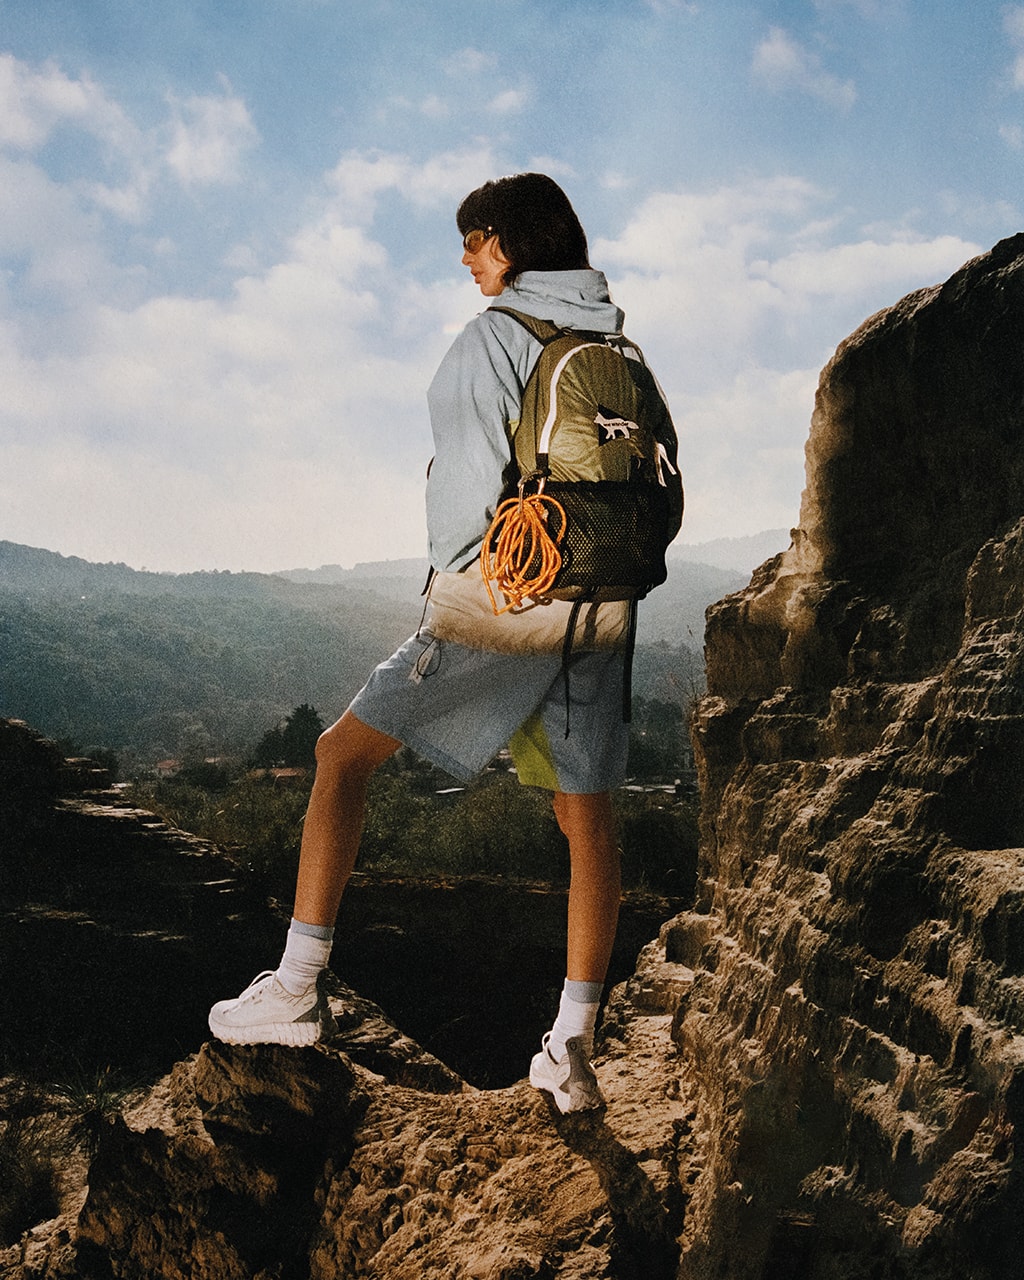 Maison Kitsuné and wander spring summer collaboration activewear campaign imagery 